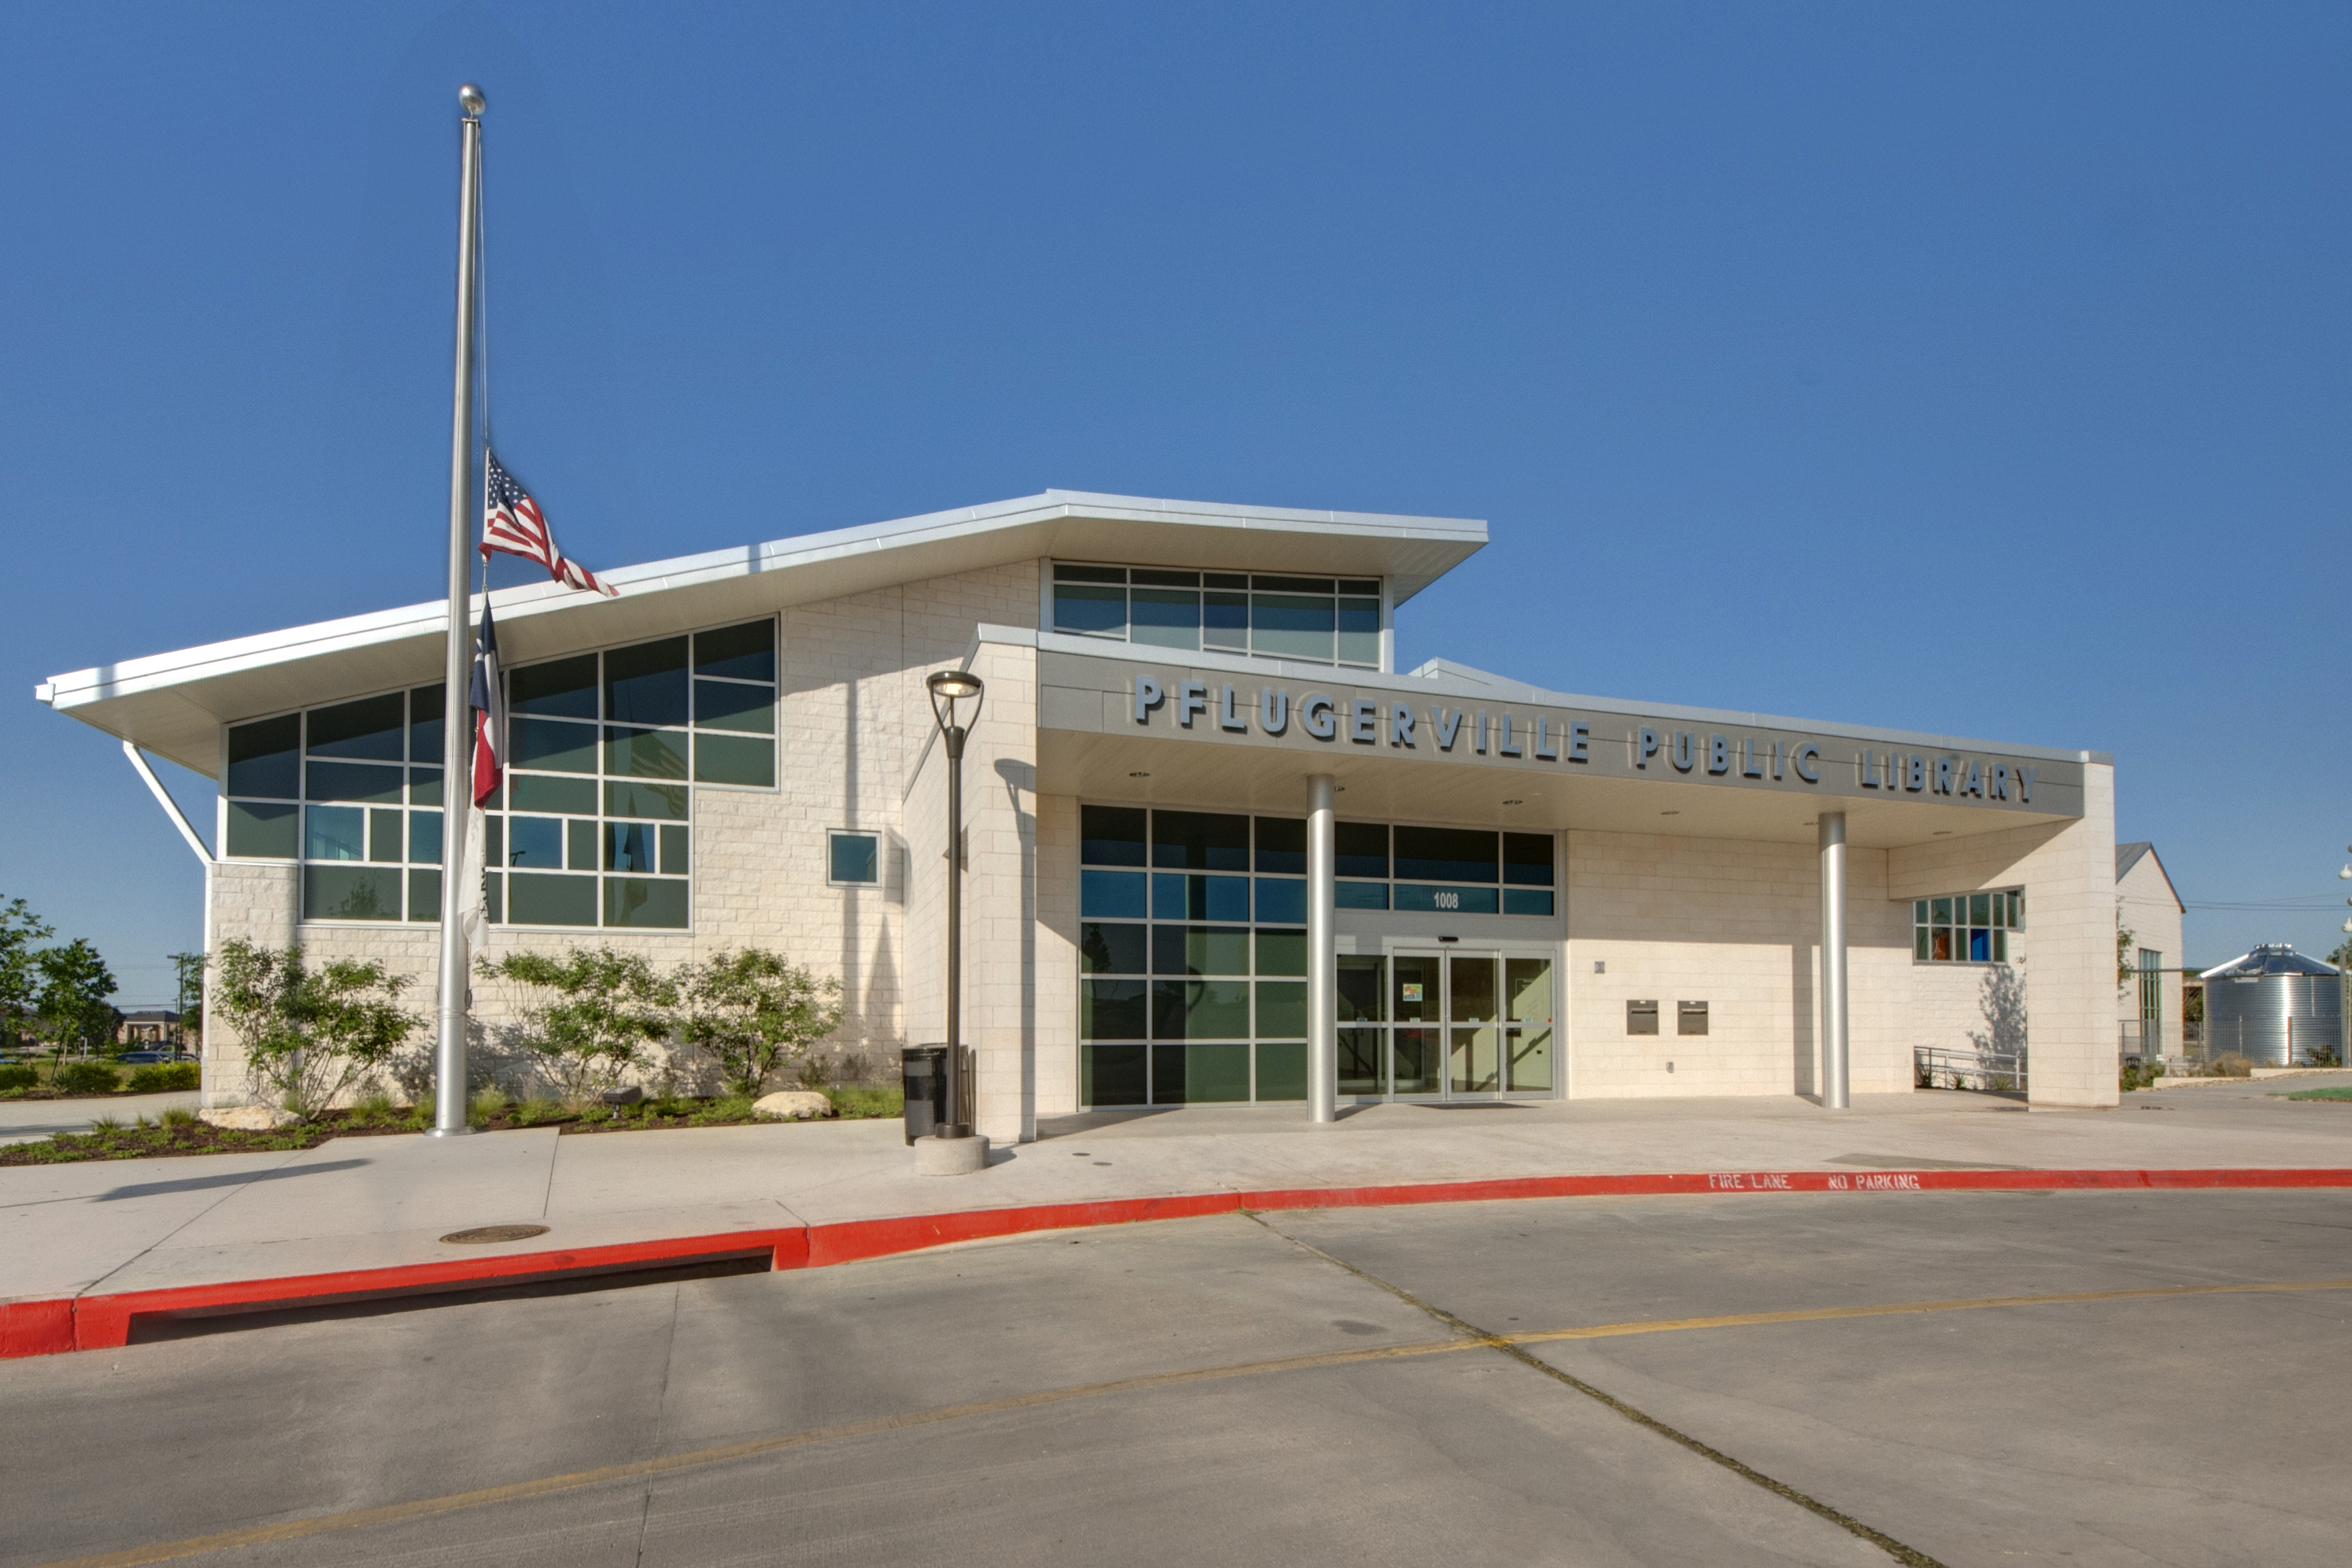  City of Pflugerville | Public Library category